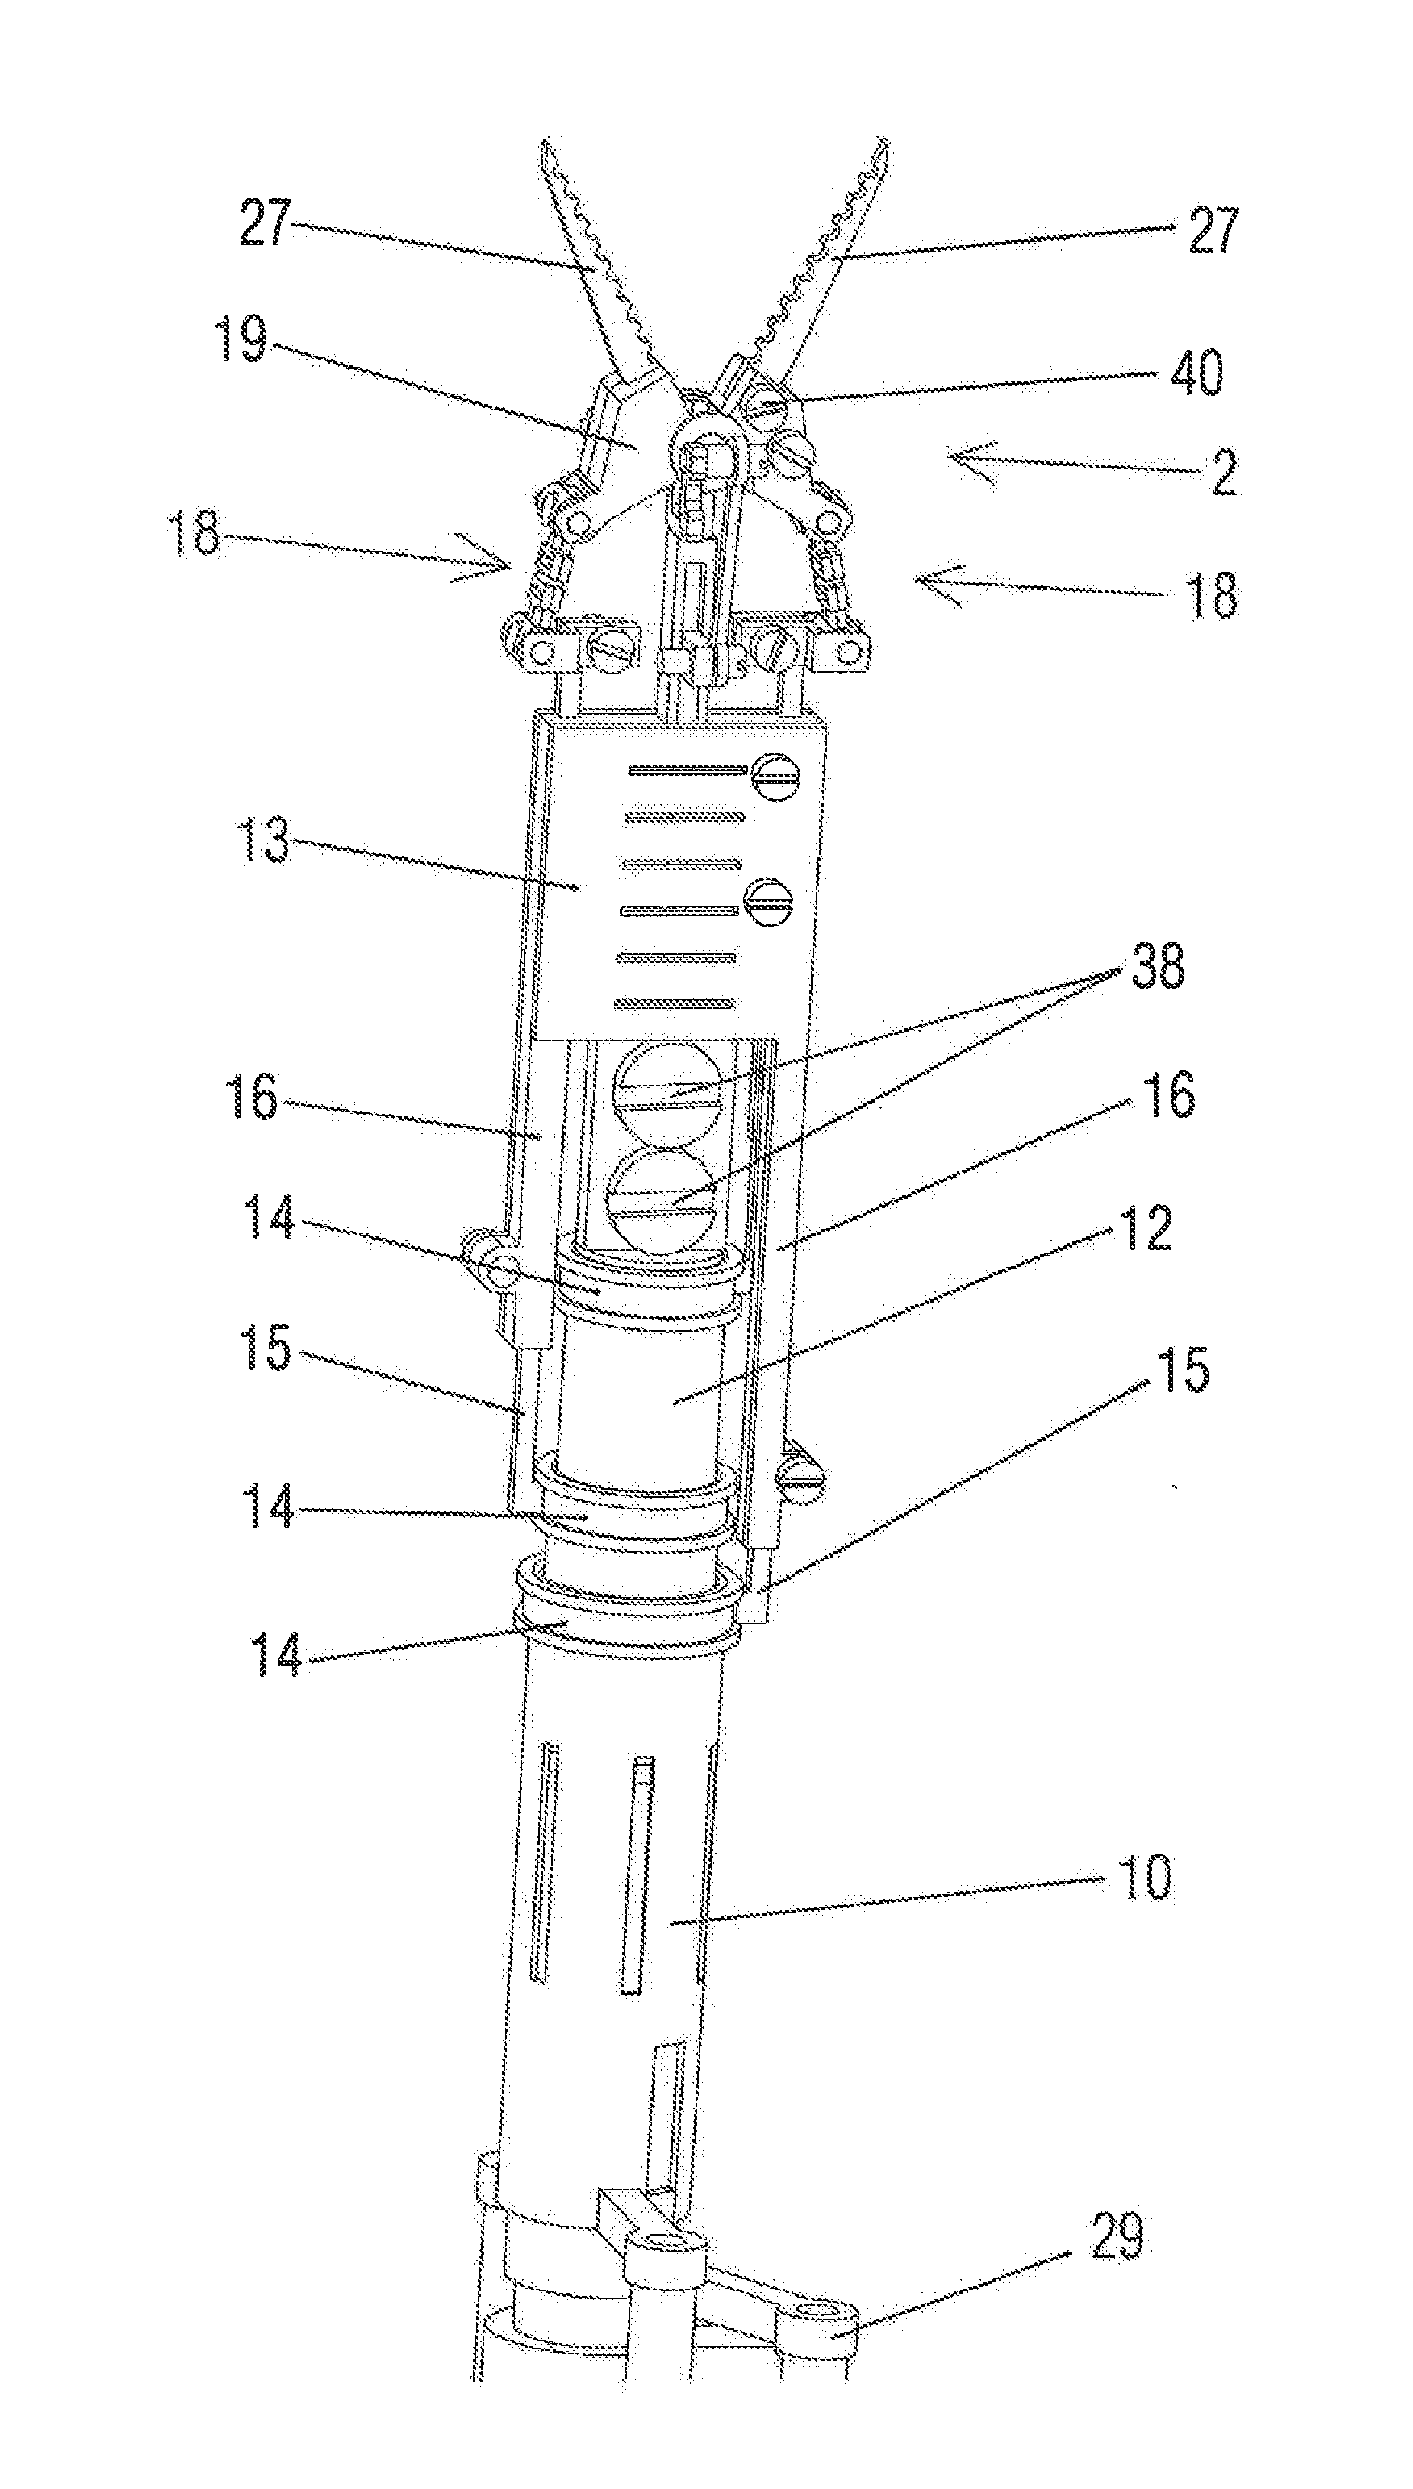 Portable stand-alone device, particularly suitable for use in surgery, micro-component handling and the like